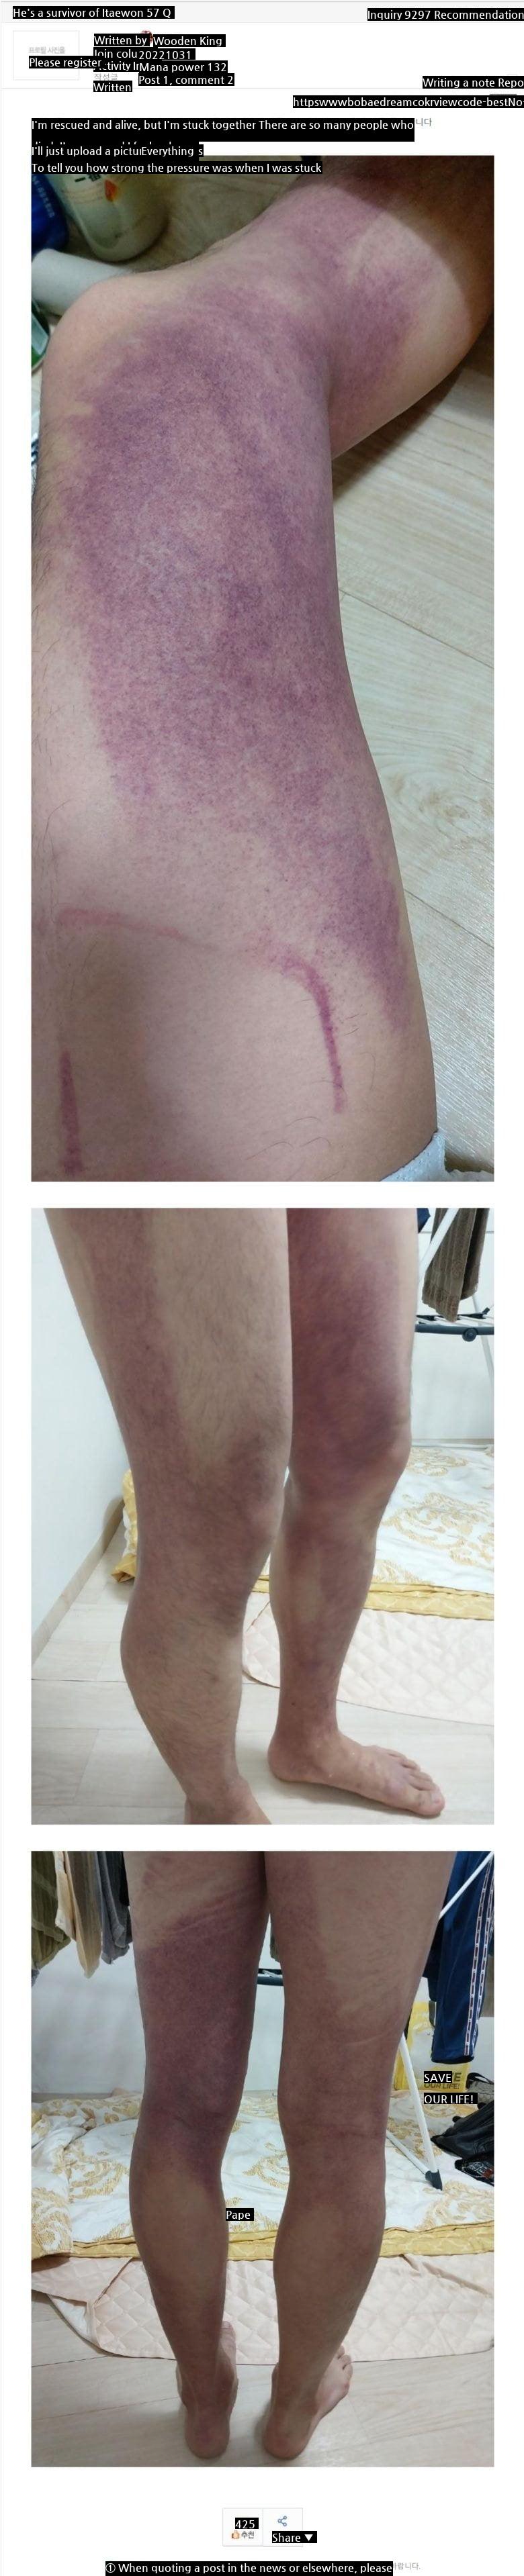 The state of his legs posted by a survivor of the Itaewon disaster.jpg